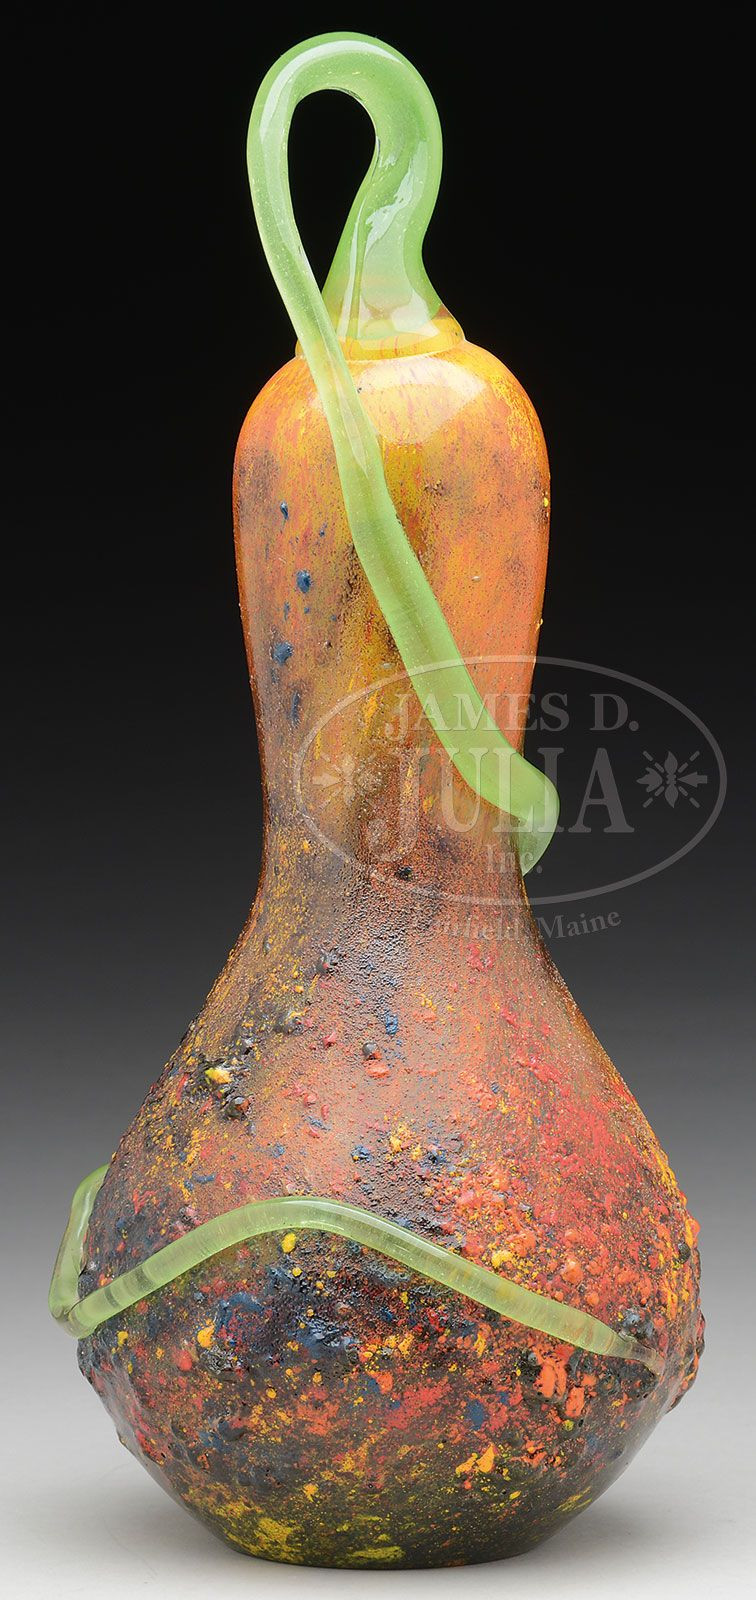 18 Unique Red and orange Vase 2022 free download red and orange vase of daum vitrified gourd vase daum gourd vase has vitrified glass body with regard to daum vitrified gourd vase daum gourd vase has vitrified glass body with splashes of r